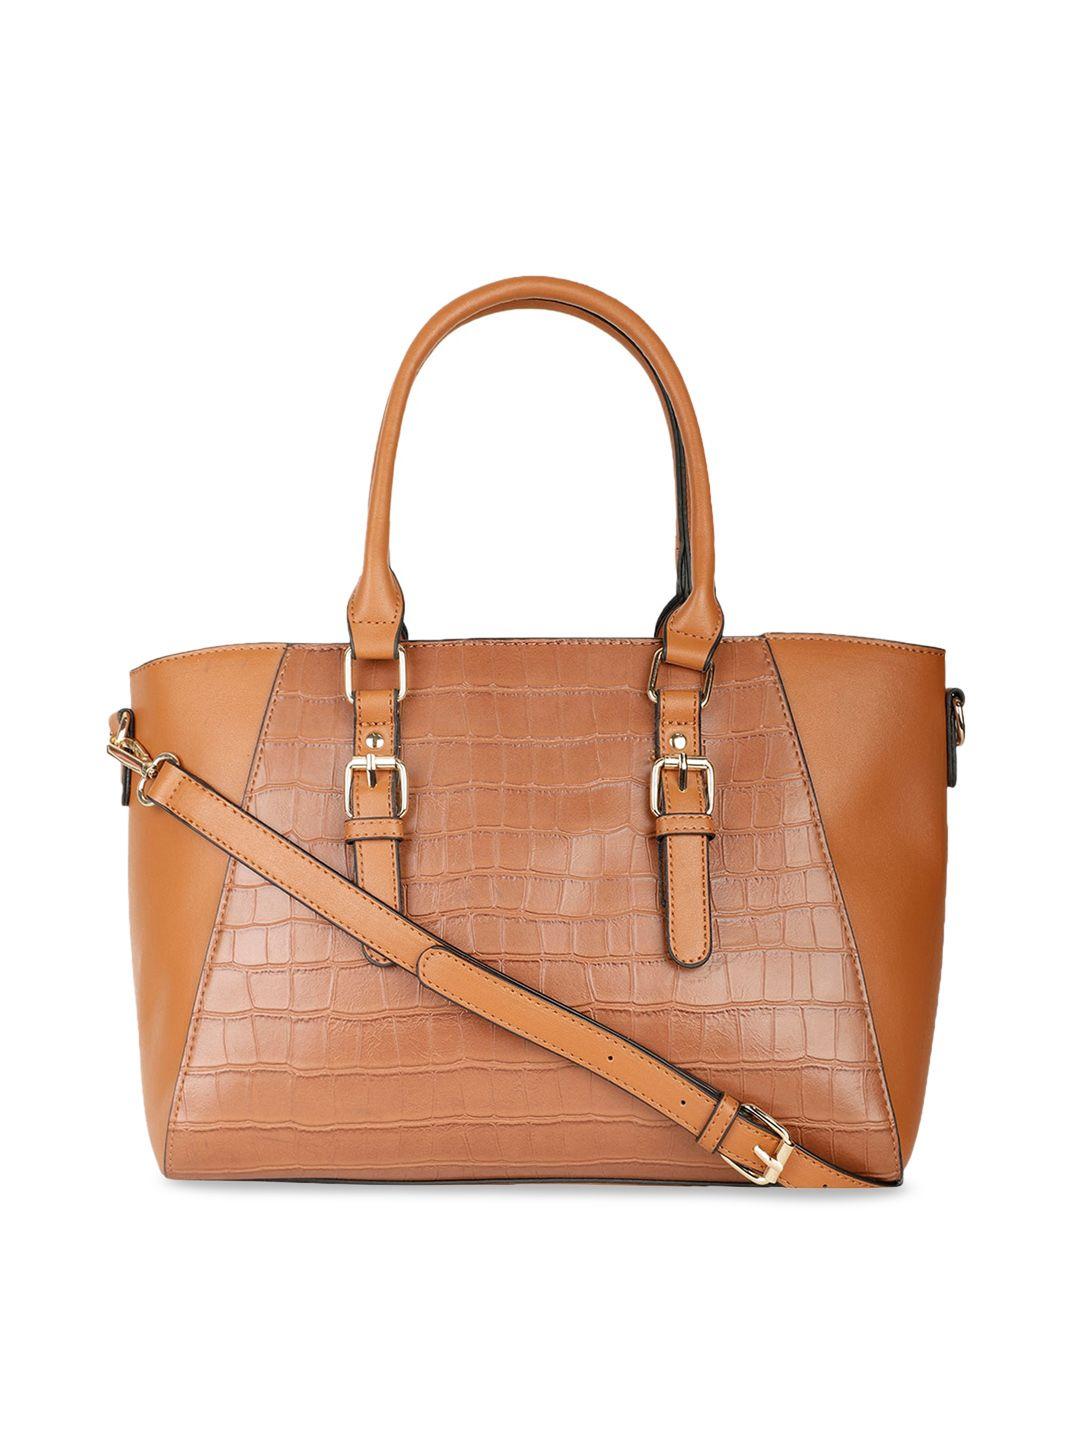 marie claire brown textured structured shoulder bag